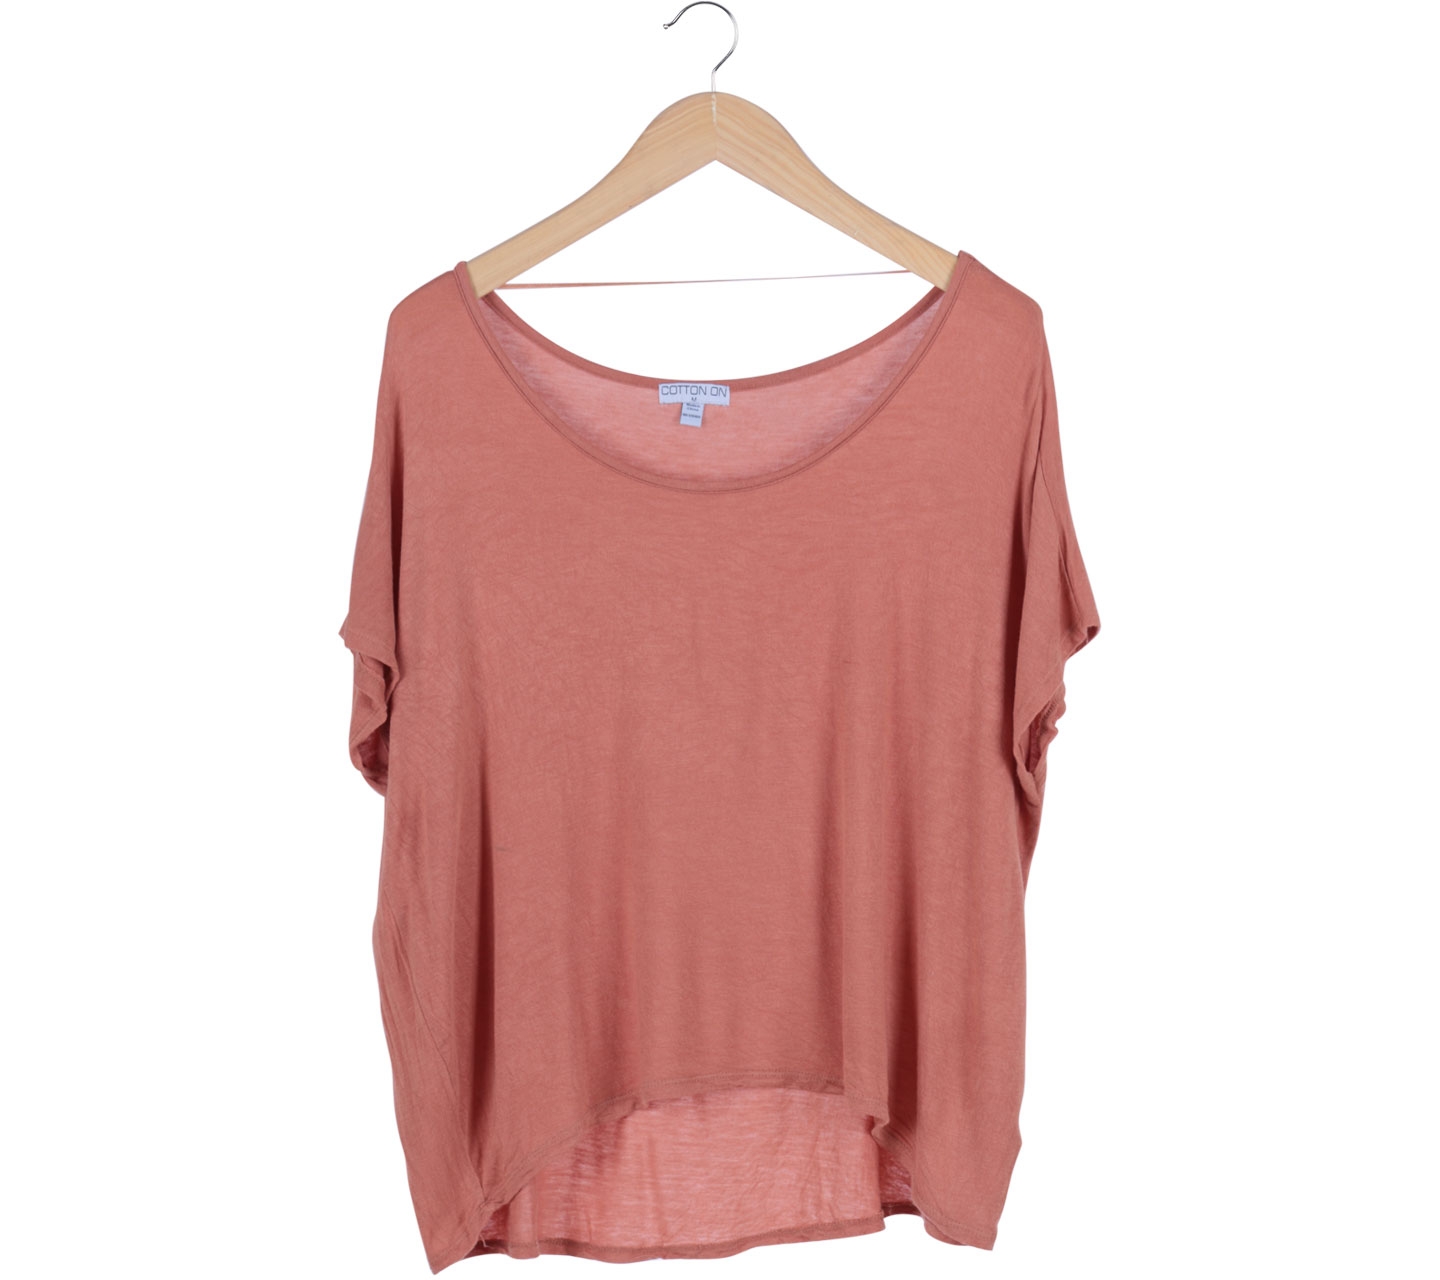 Cotton On Brown Loose T-Shirt